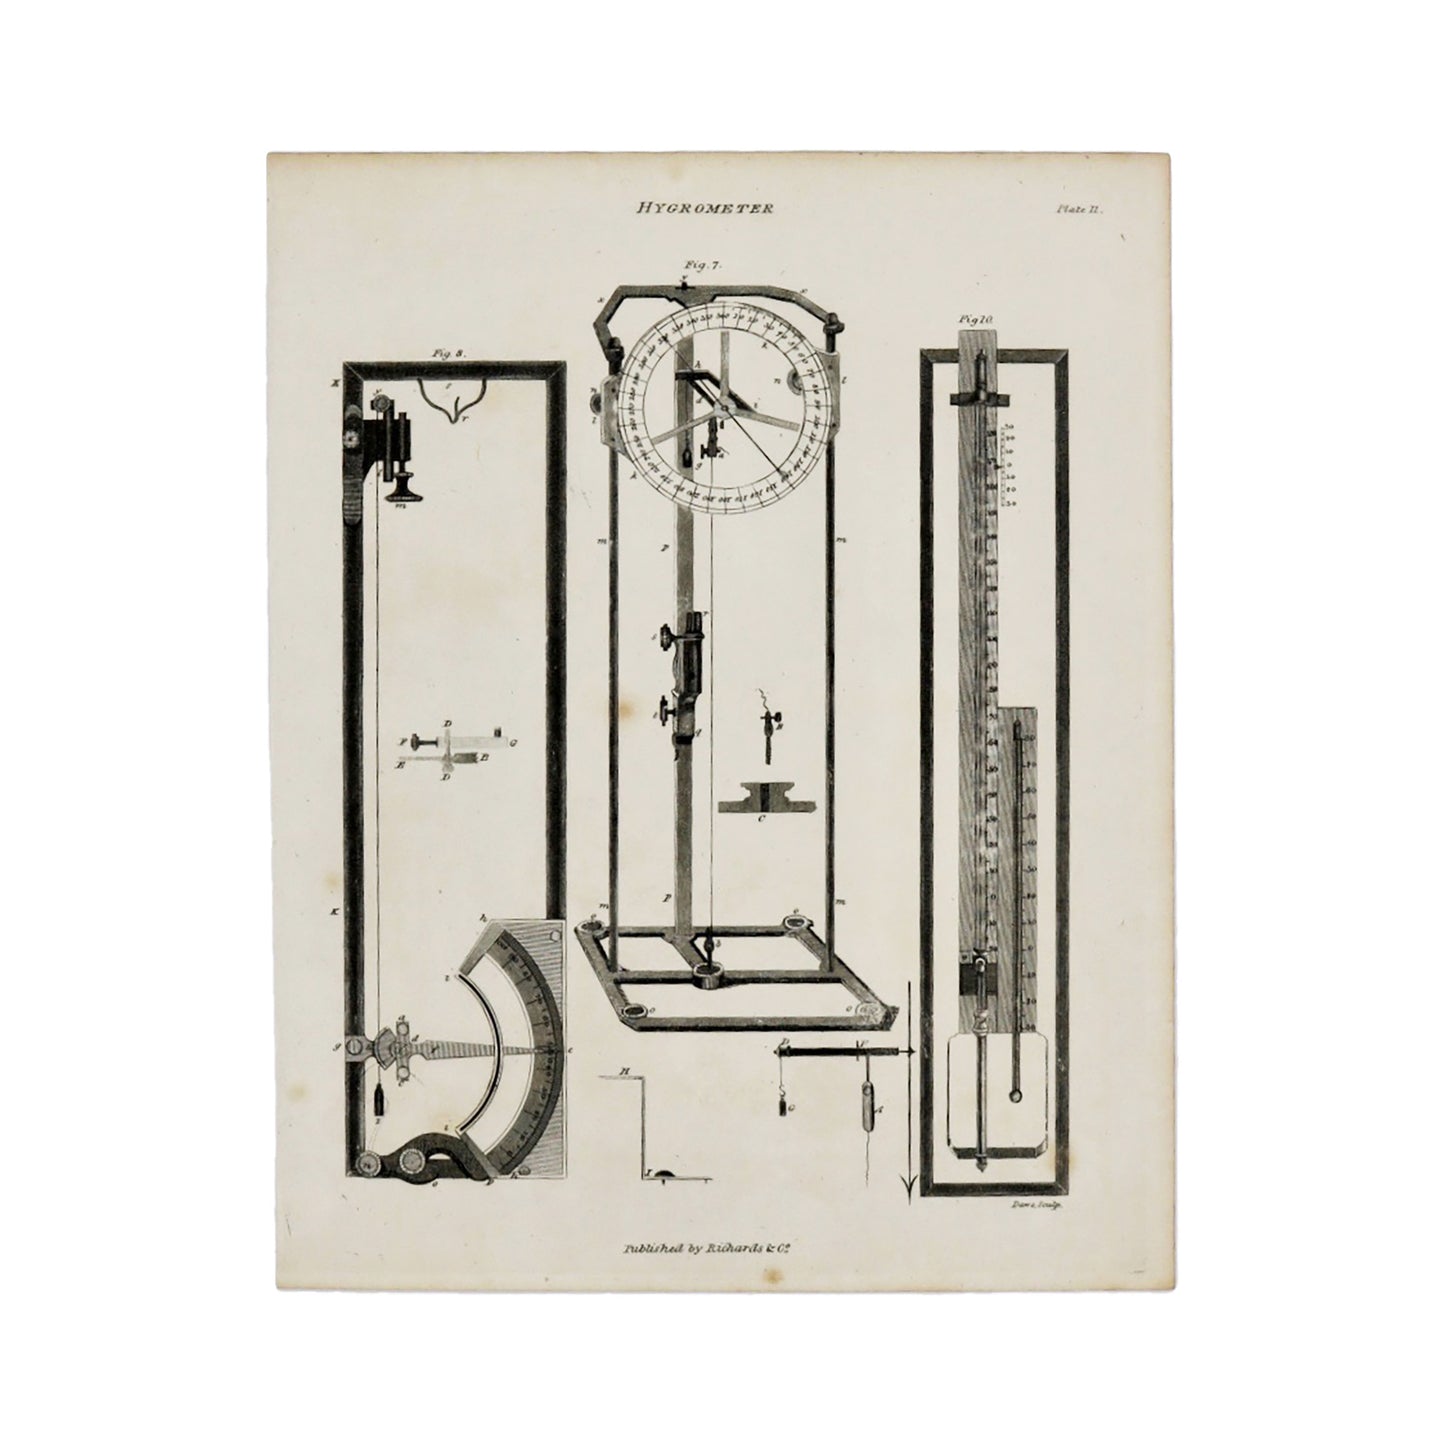 Hygrometer Plate 11  Antique 1820 Engraving from "The Modern Encyclopedia: The Latest Discoveries in each Department of Knowledge."  1820s etching of a hygrometer, a tool used for measuring humidity  Measures 10.5 x 8.25 inches